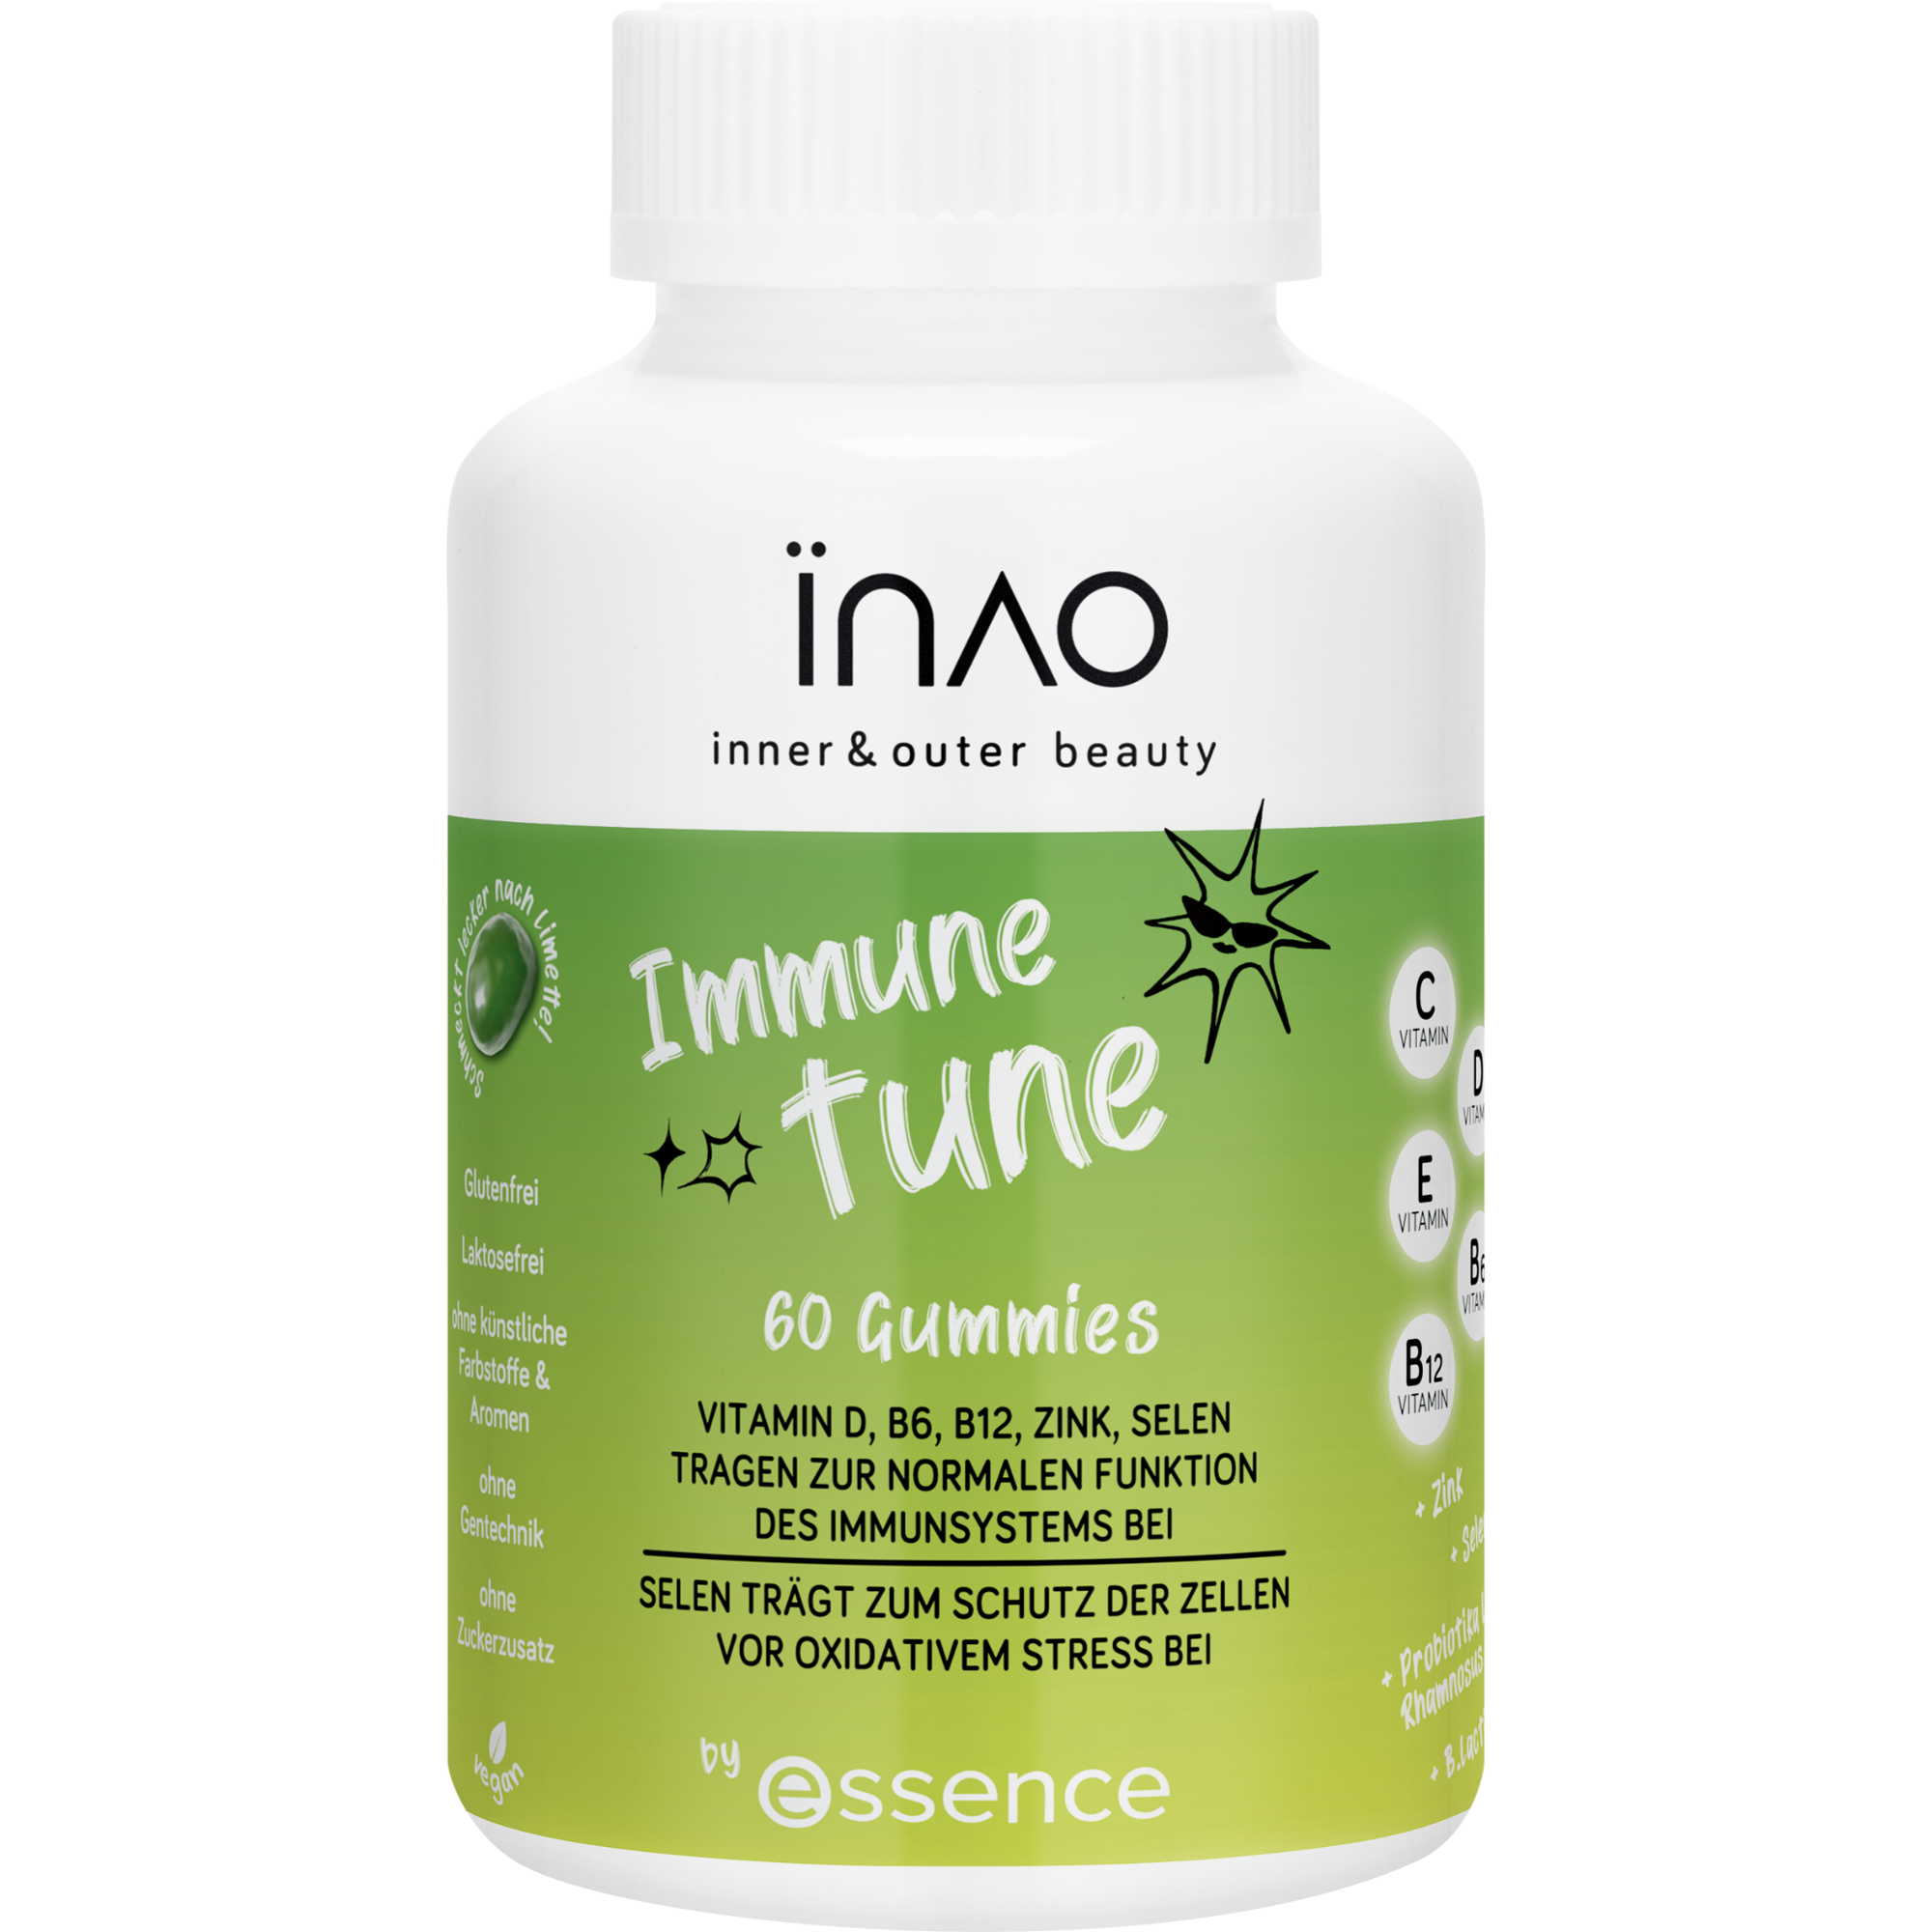 Gomas ImunoTune INAO inner and outer beauty by essence